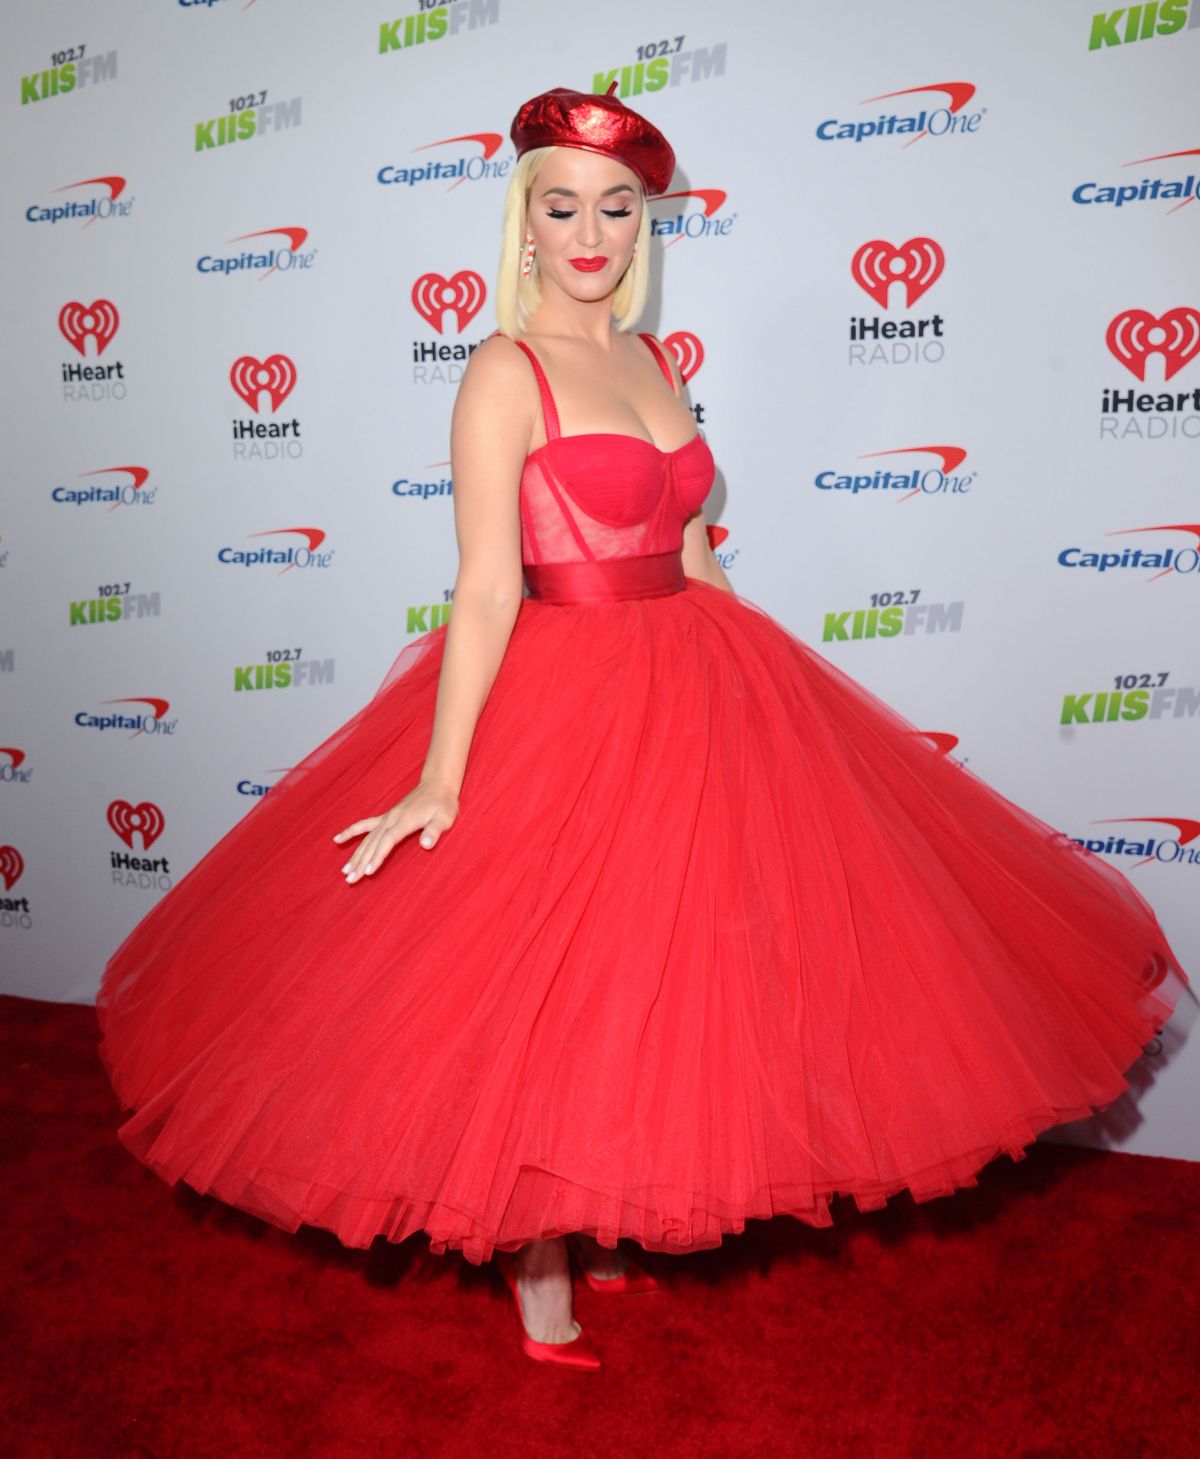 KATY PERRY at Kiss FM Jingle Ball 2019 in Los Angeles 06/12/2019 ...